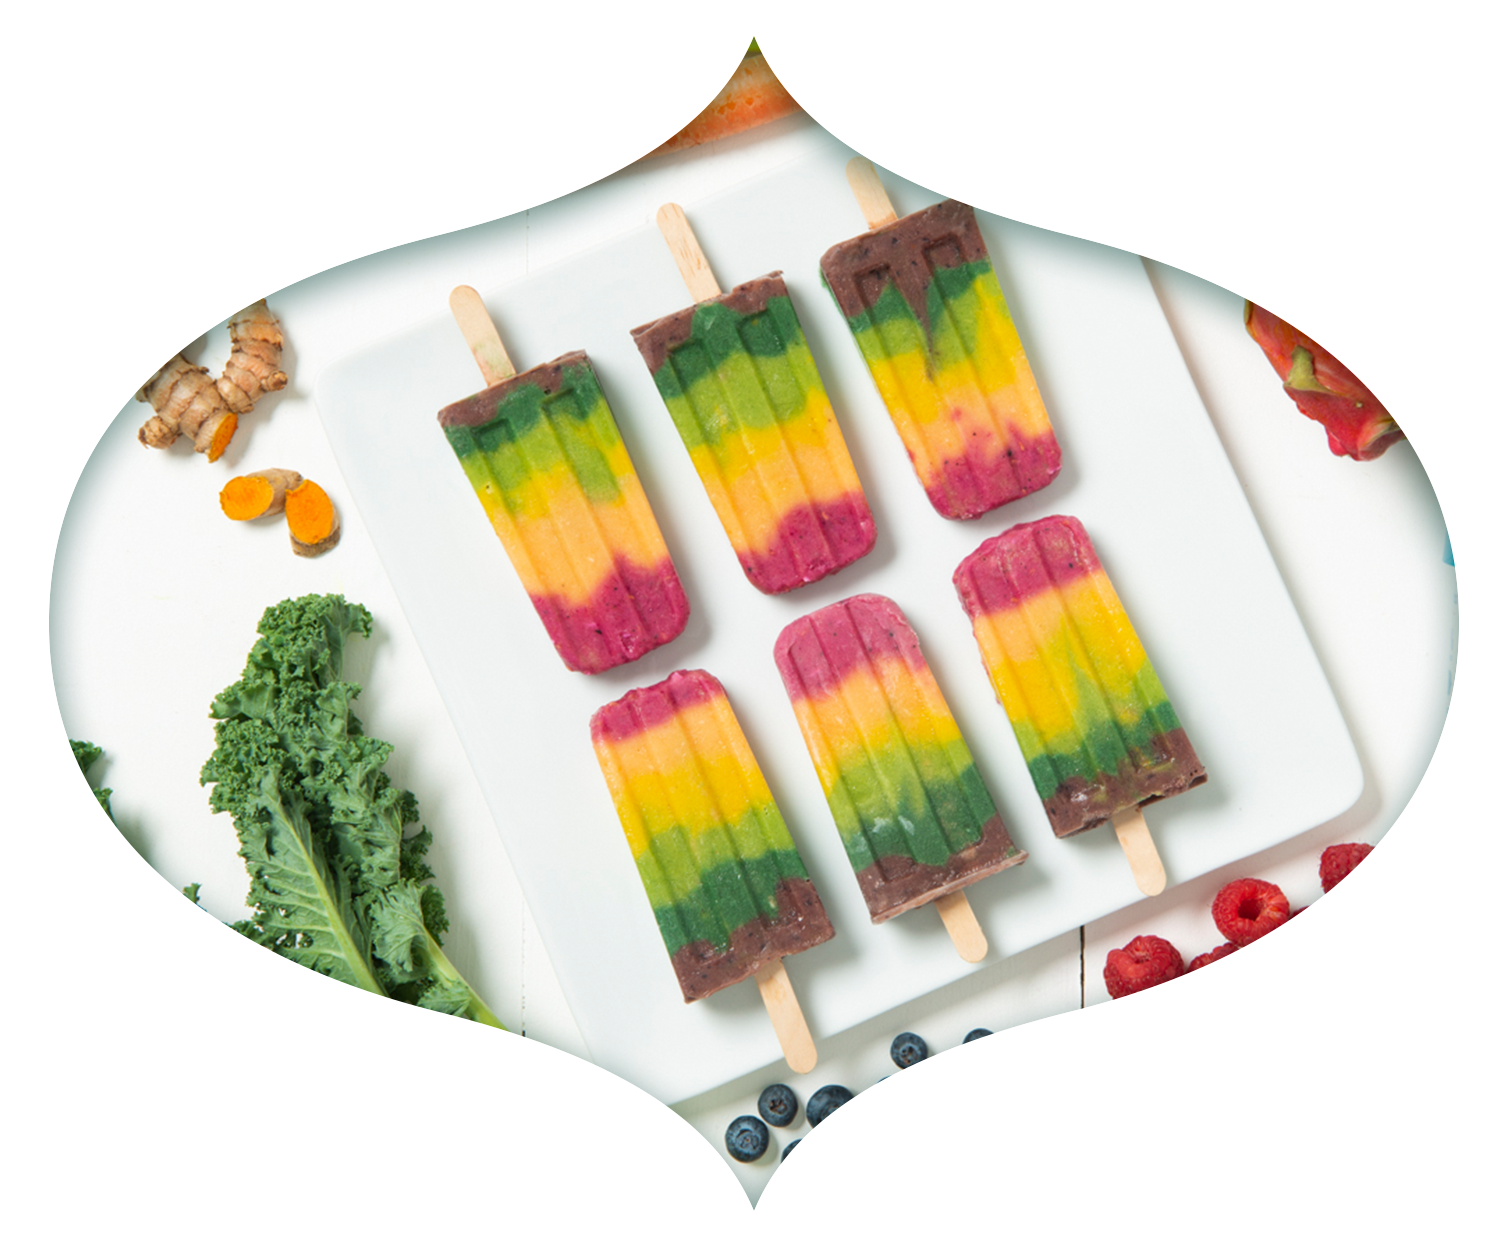 Rainbow popsicles made with Cosmic Bliss Infinite Coconut ice cream and other natural ingredients